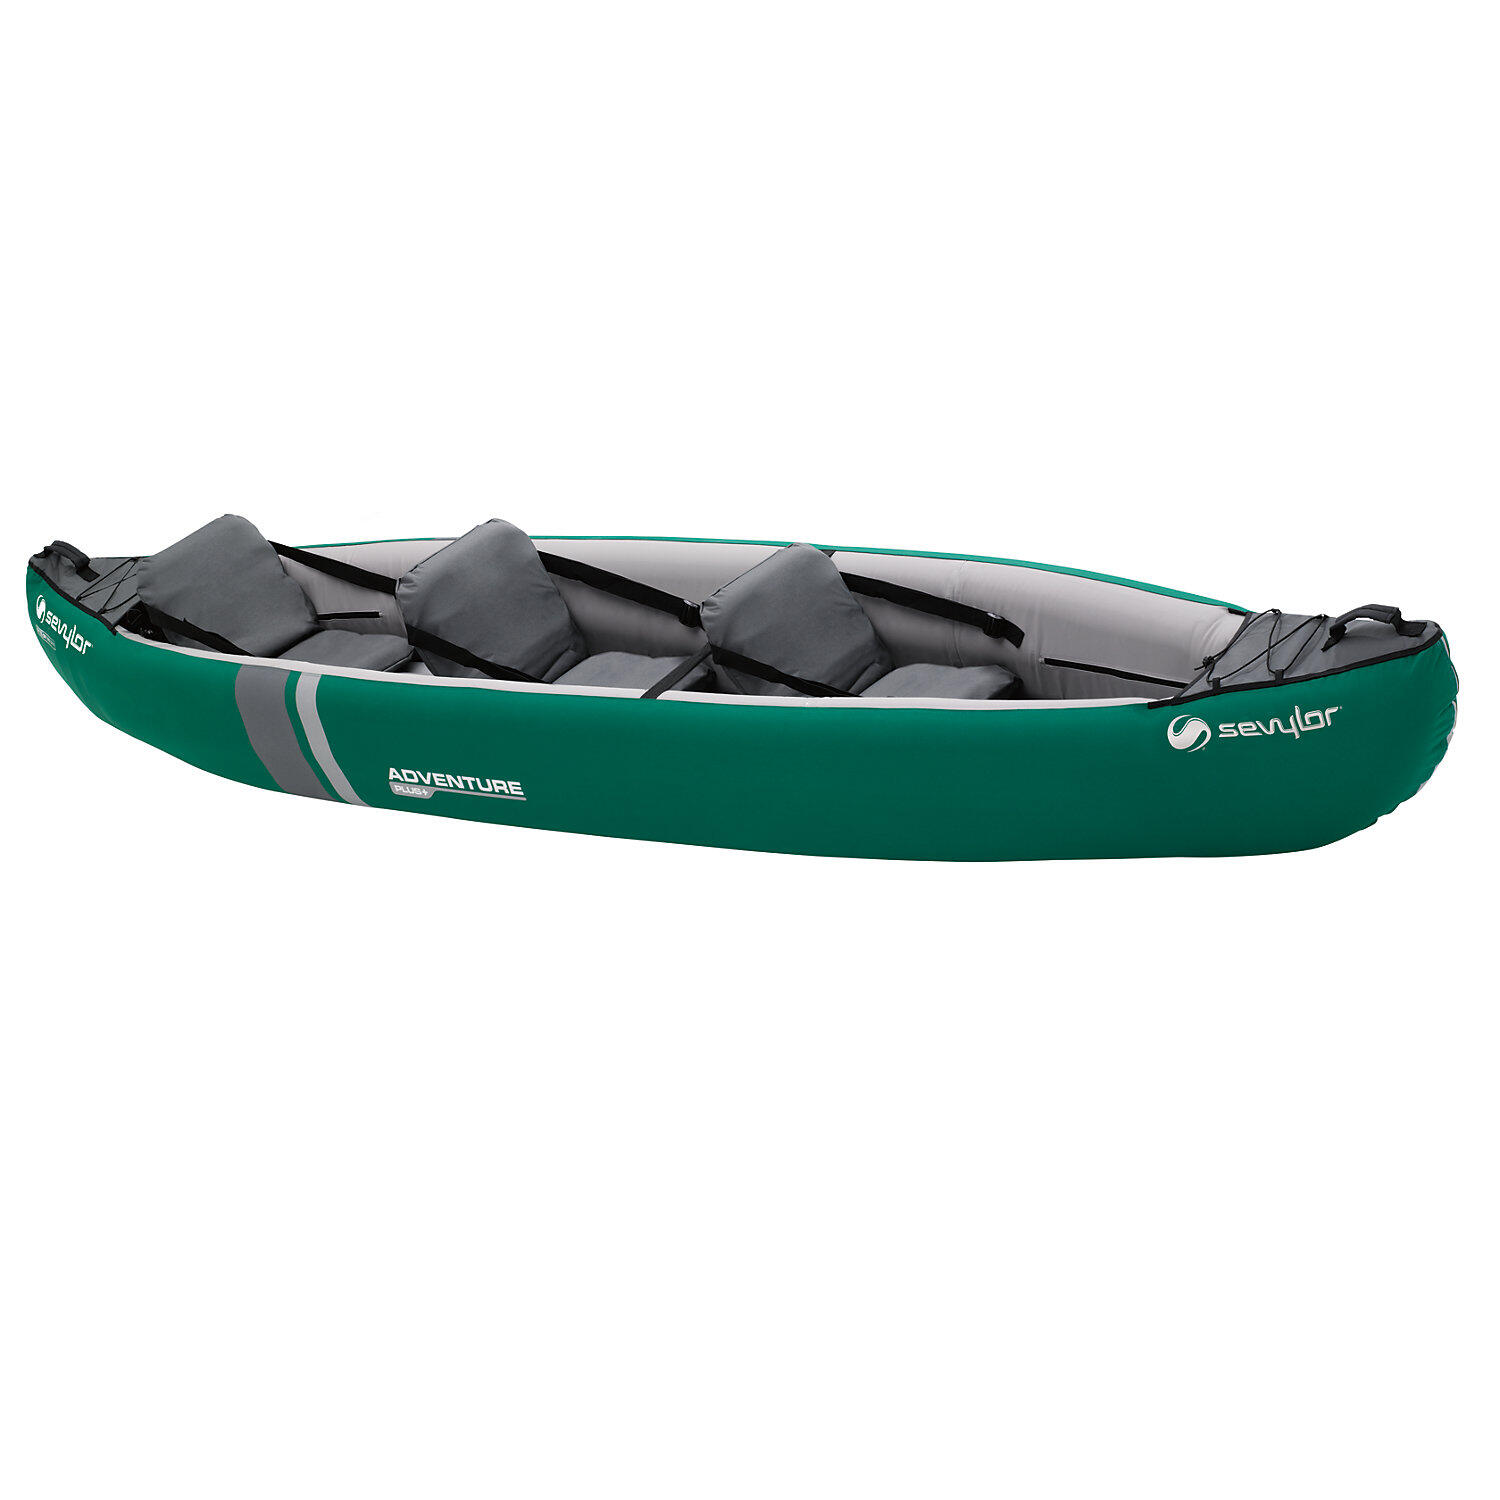 Adventure Plus Inflatable 3 person canoe/kayak kit with Oar/Paddle and Pump 2/6